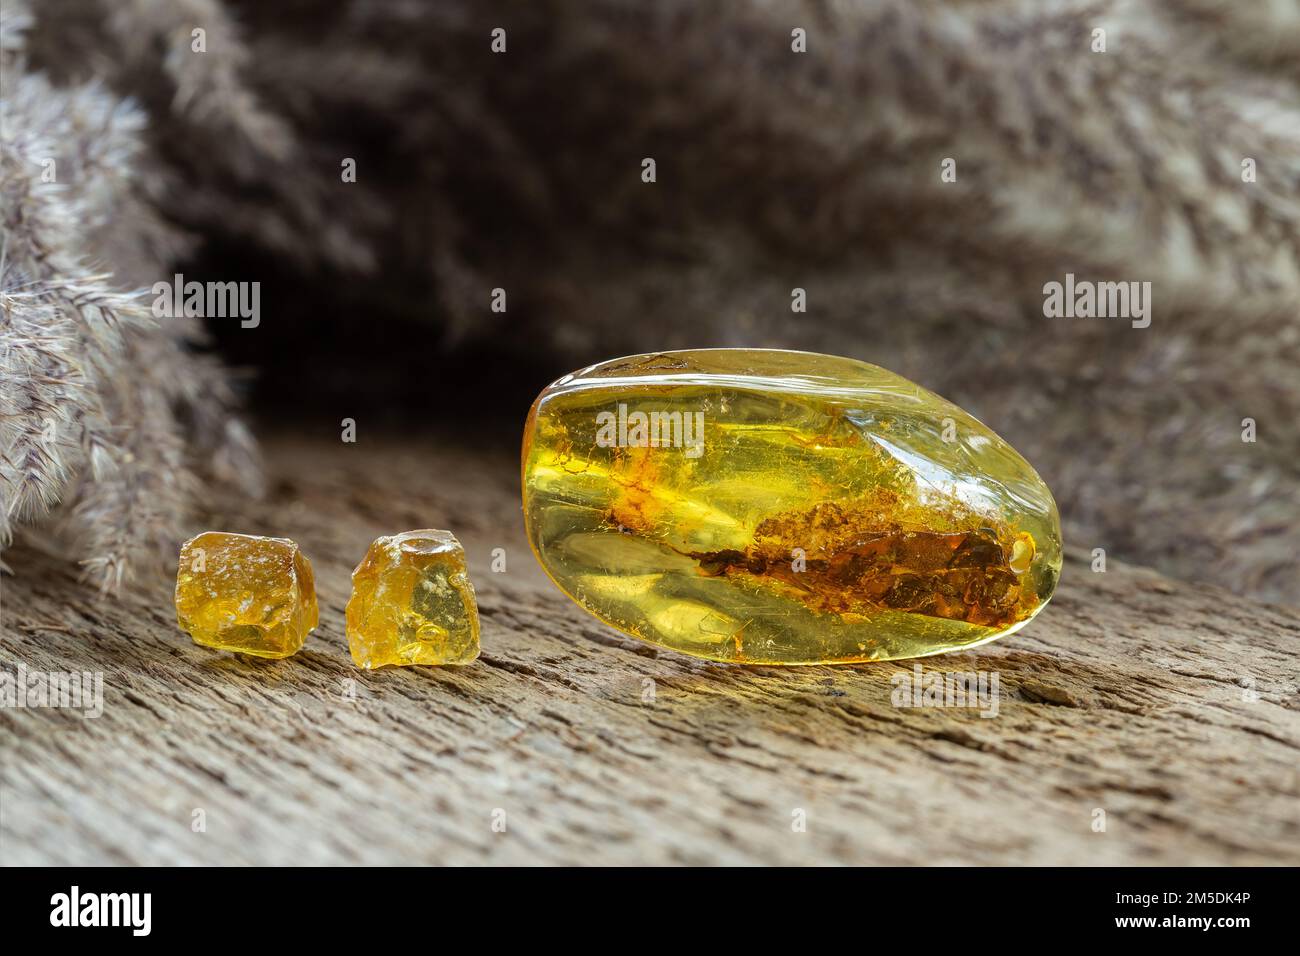 Amber-like Yellow Copal with Rosin Mineralized Stones Samples on Wooden Background Stock Photo